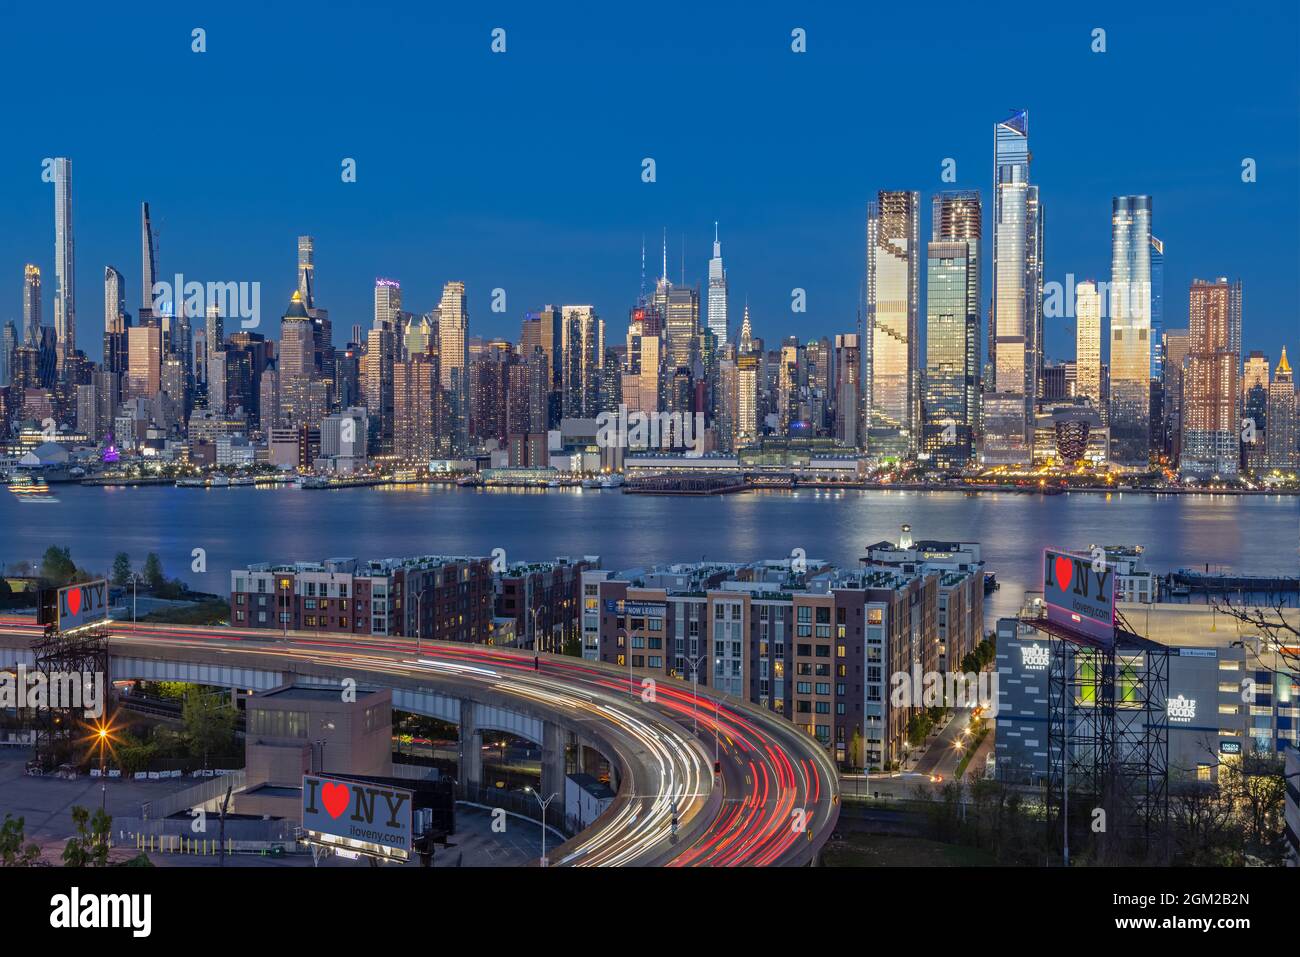 I Love NYC Skyline  - Upper view to the Lincoln Tunnel Helix, located in Weehawken, New Jersey and the Midtown Manhattan New York City Skyline during Stock Photo